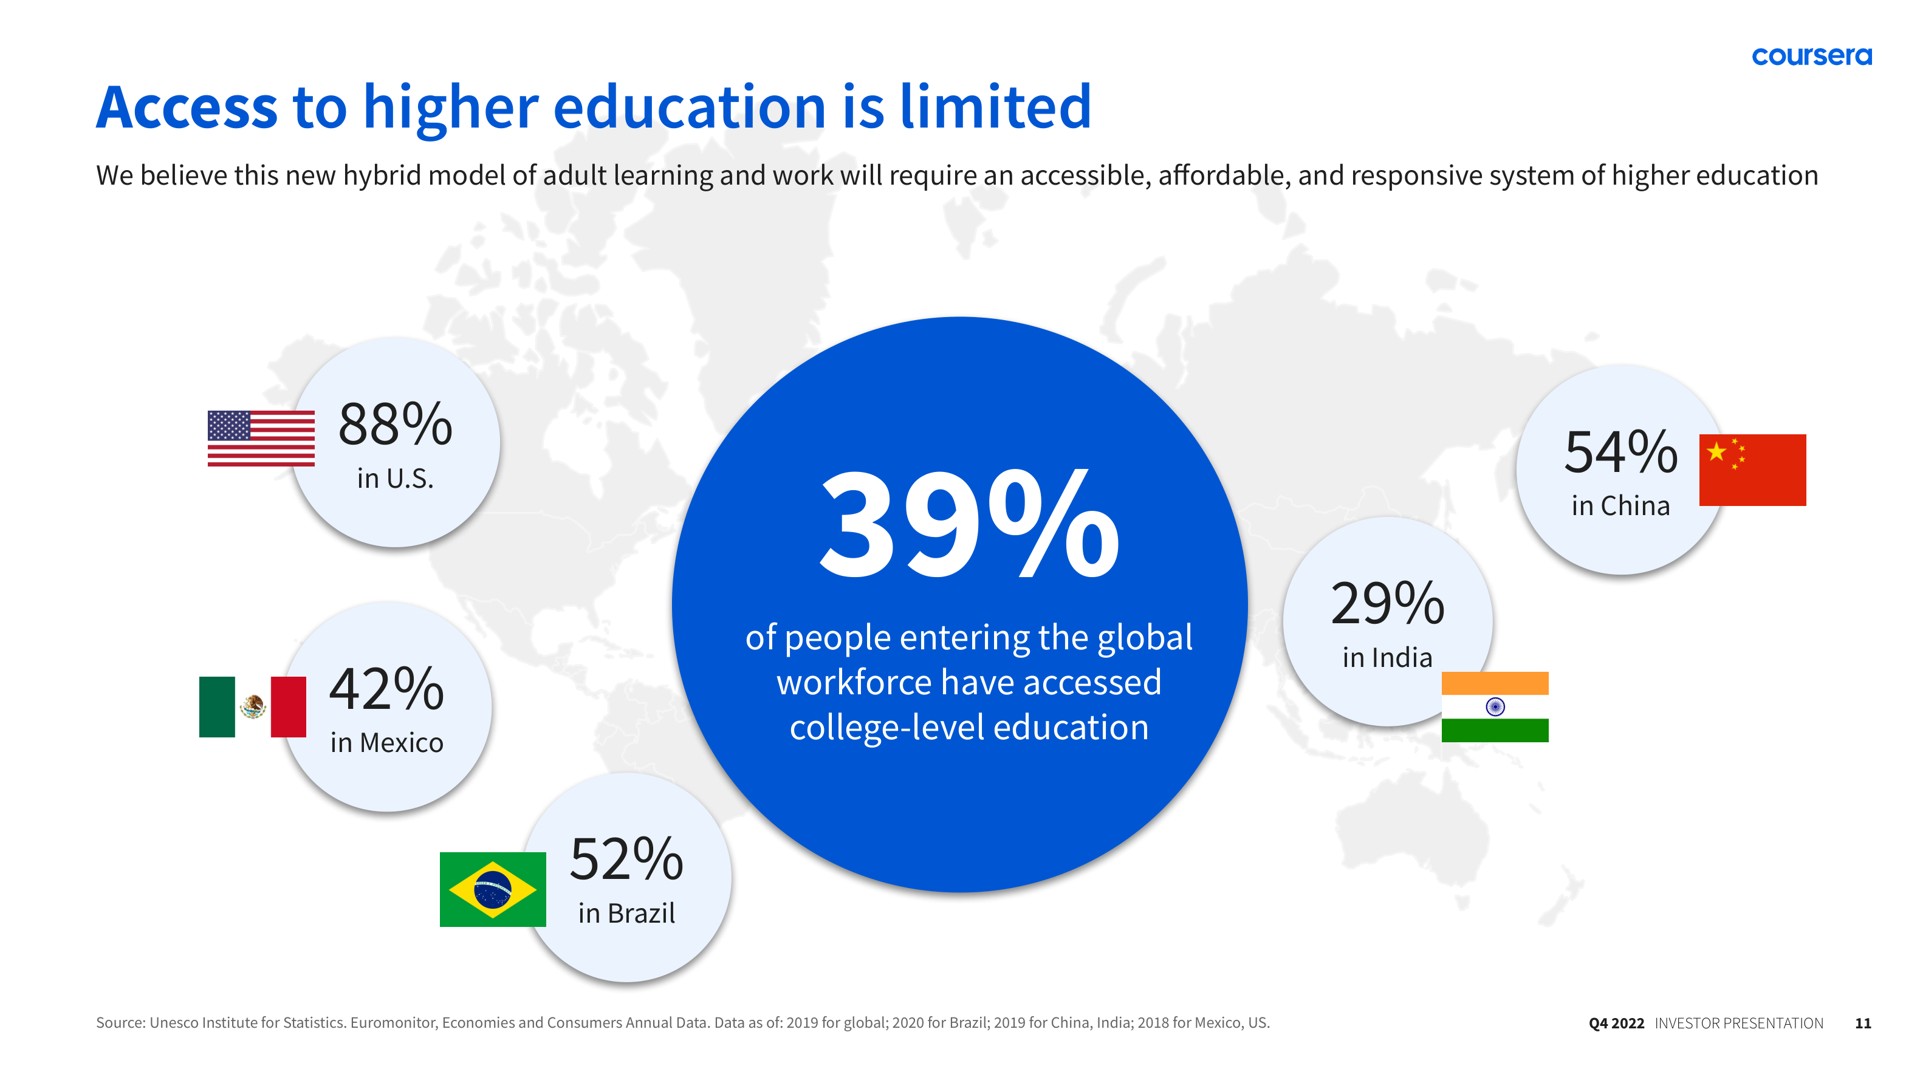 access to higher education is limited have accessed college level education a | Coursera